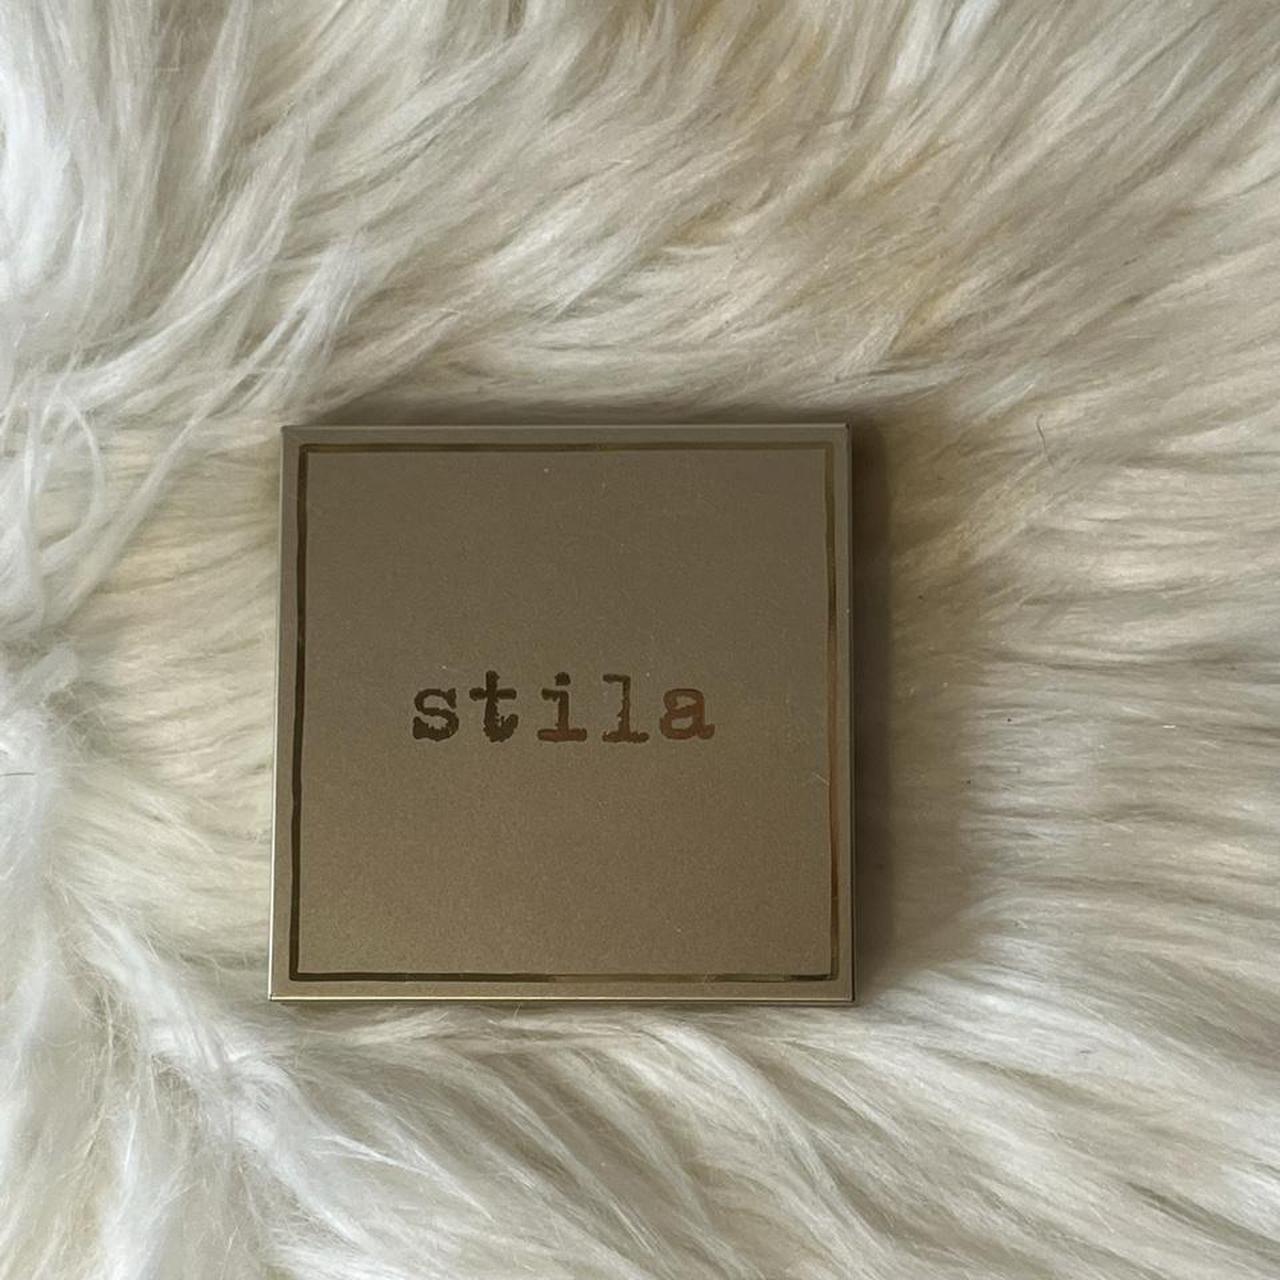 Product Image 1 - Stila Heaven’s Hue Highlighter
In shade